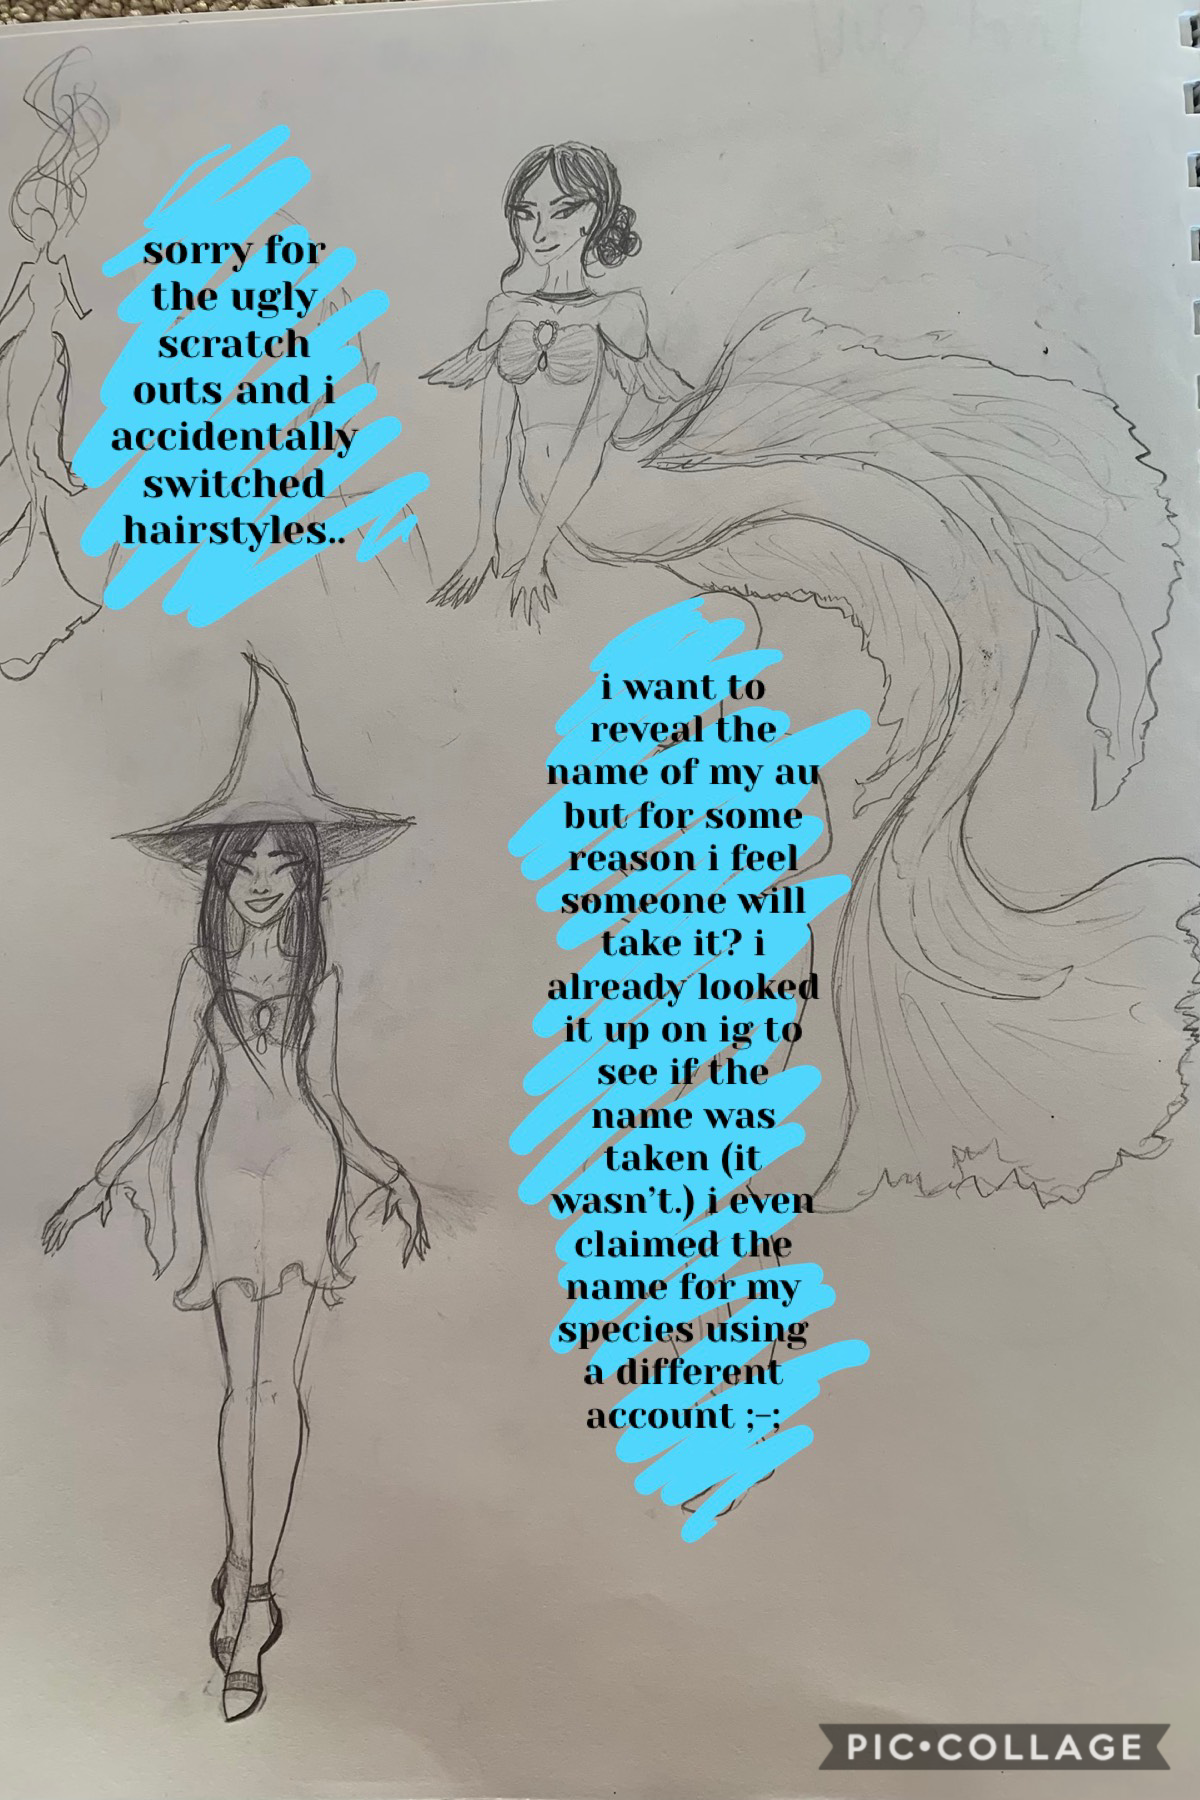 tap
the idea was simple: mermaids+witches ;-;-;-;-; im still coming up w more ideas for them. but they’re supposed to be called “mermedeis” since medeis means magic in latin. when i’ve fully developed this universe i’ll let you guys know...